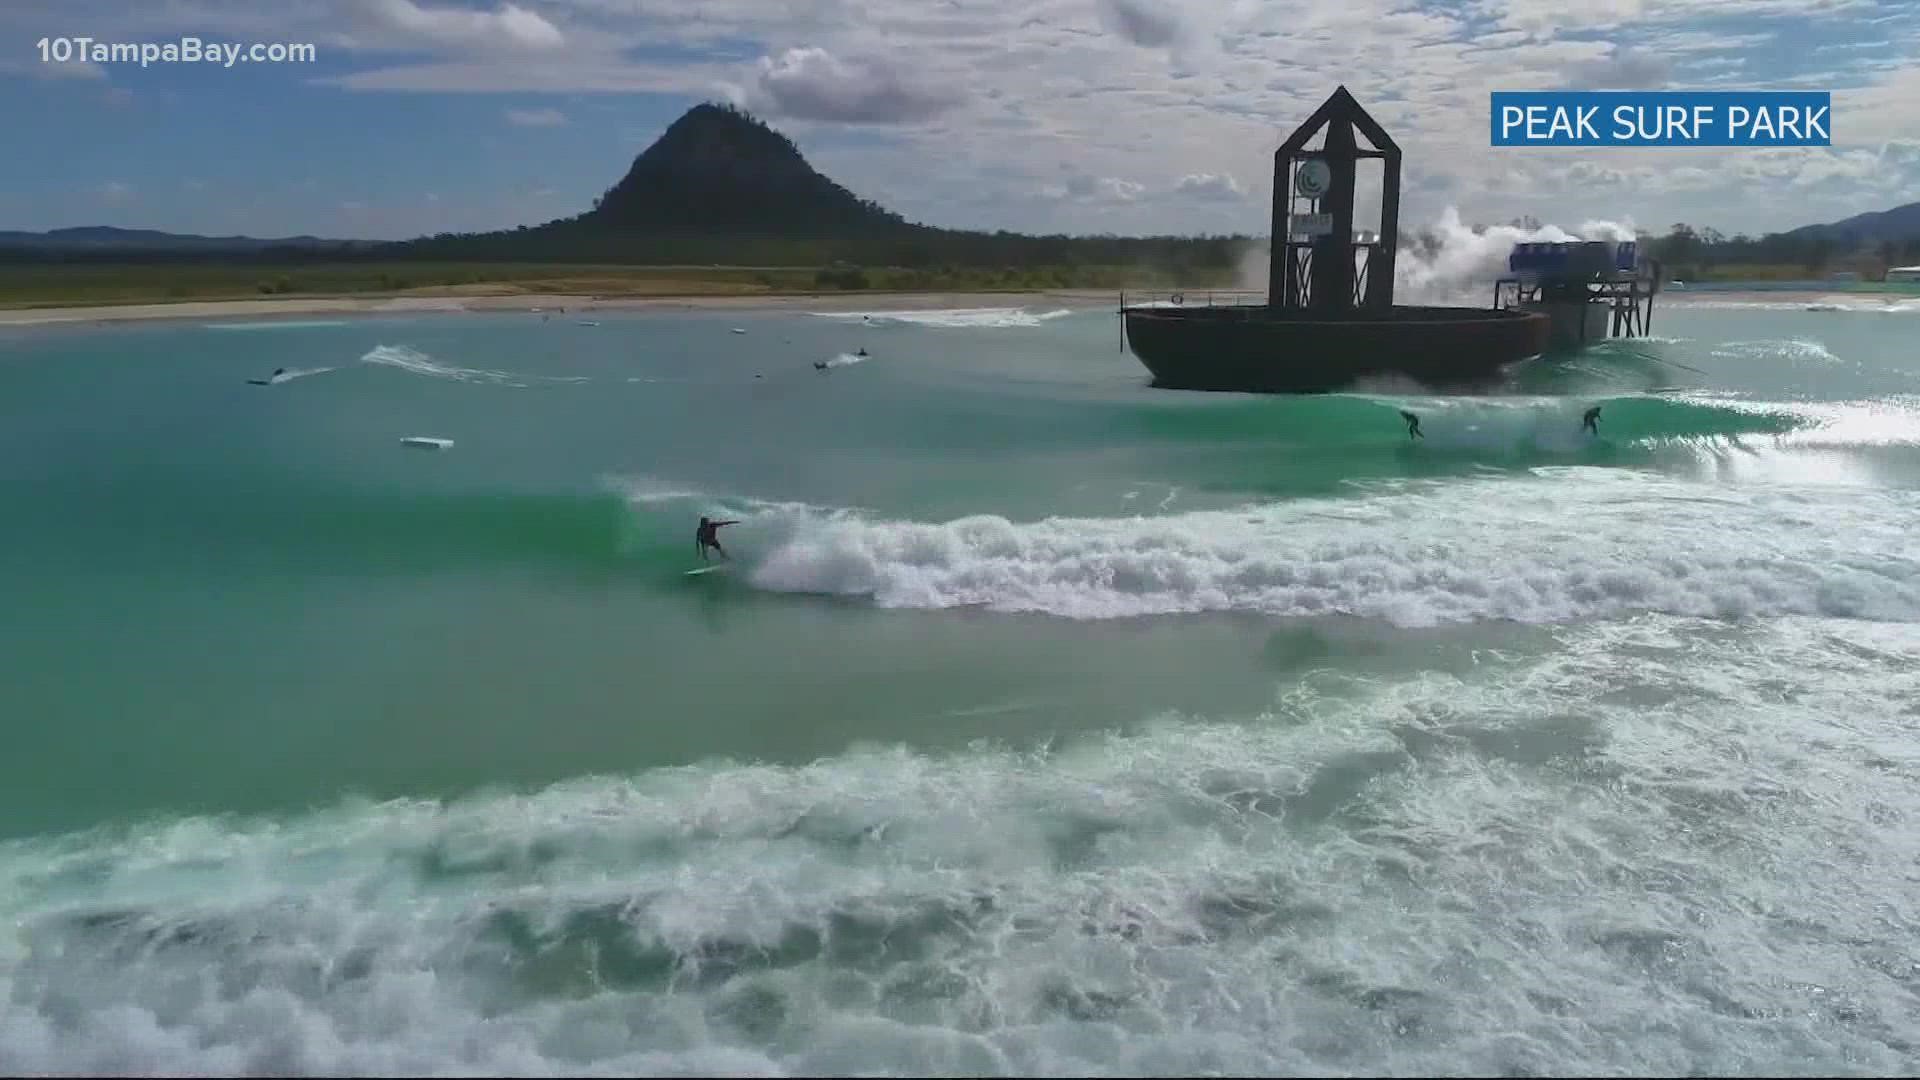 The 30-acre adventure and outdoor surf park will offer experiences for both beginners and experts.